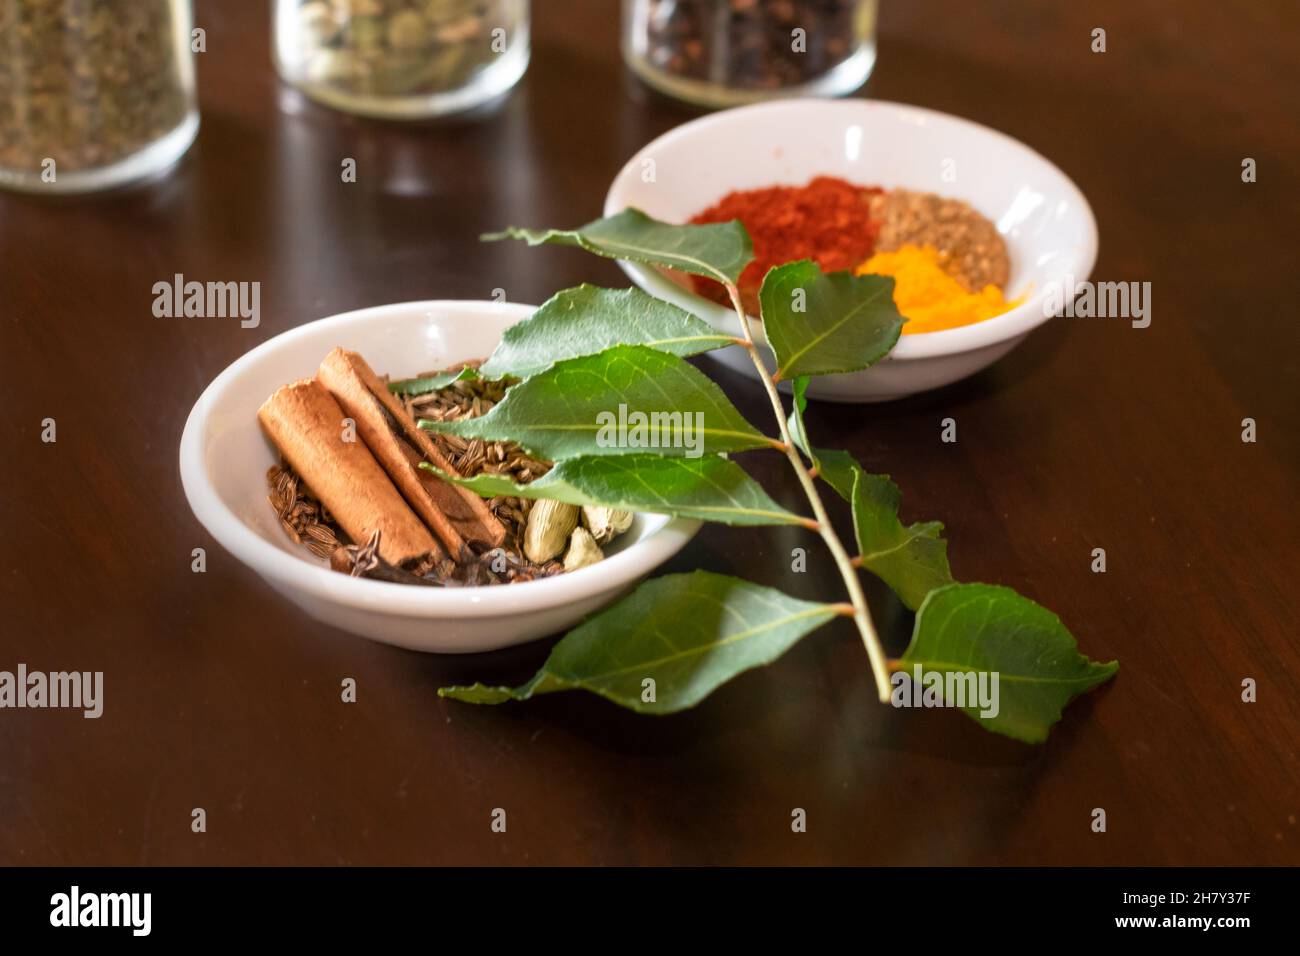 Mixture of Asian spices used to make curry displayed on a wooden table with fresh curry leaves as a garnish Stock Photo